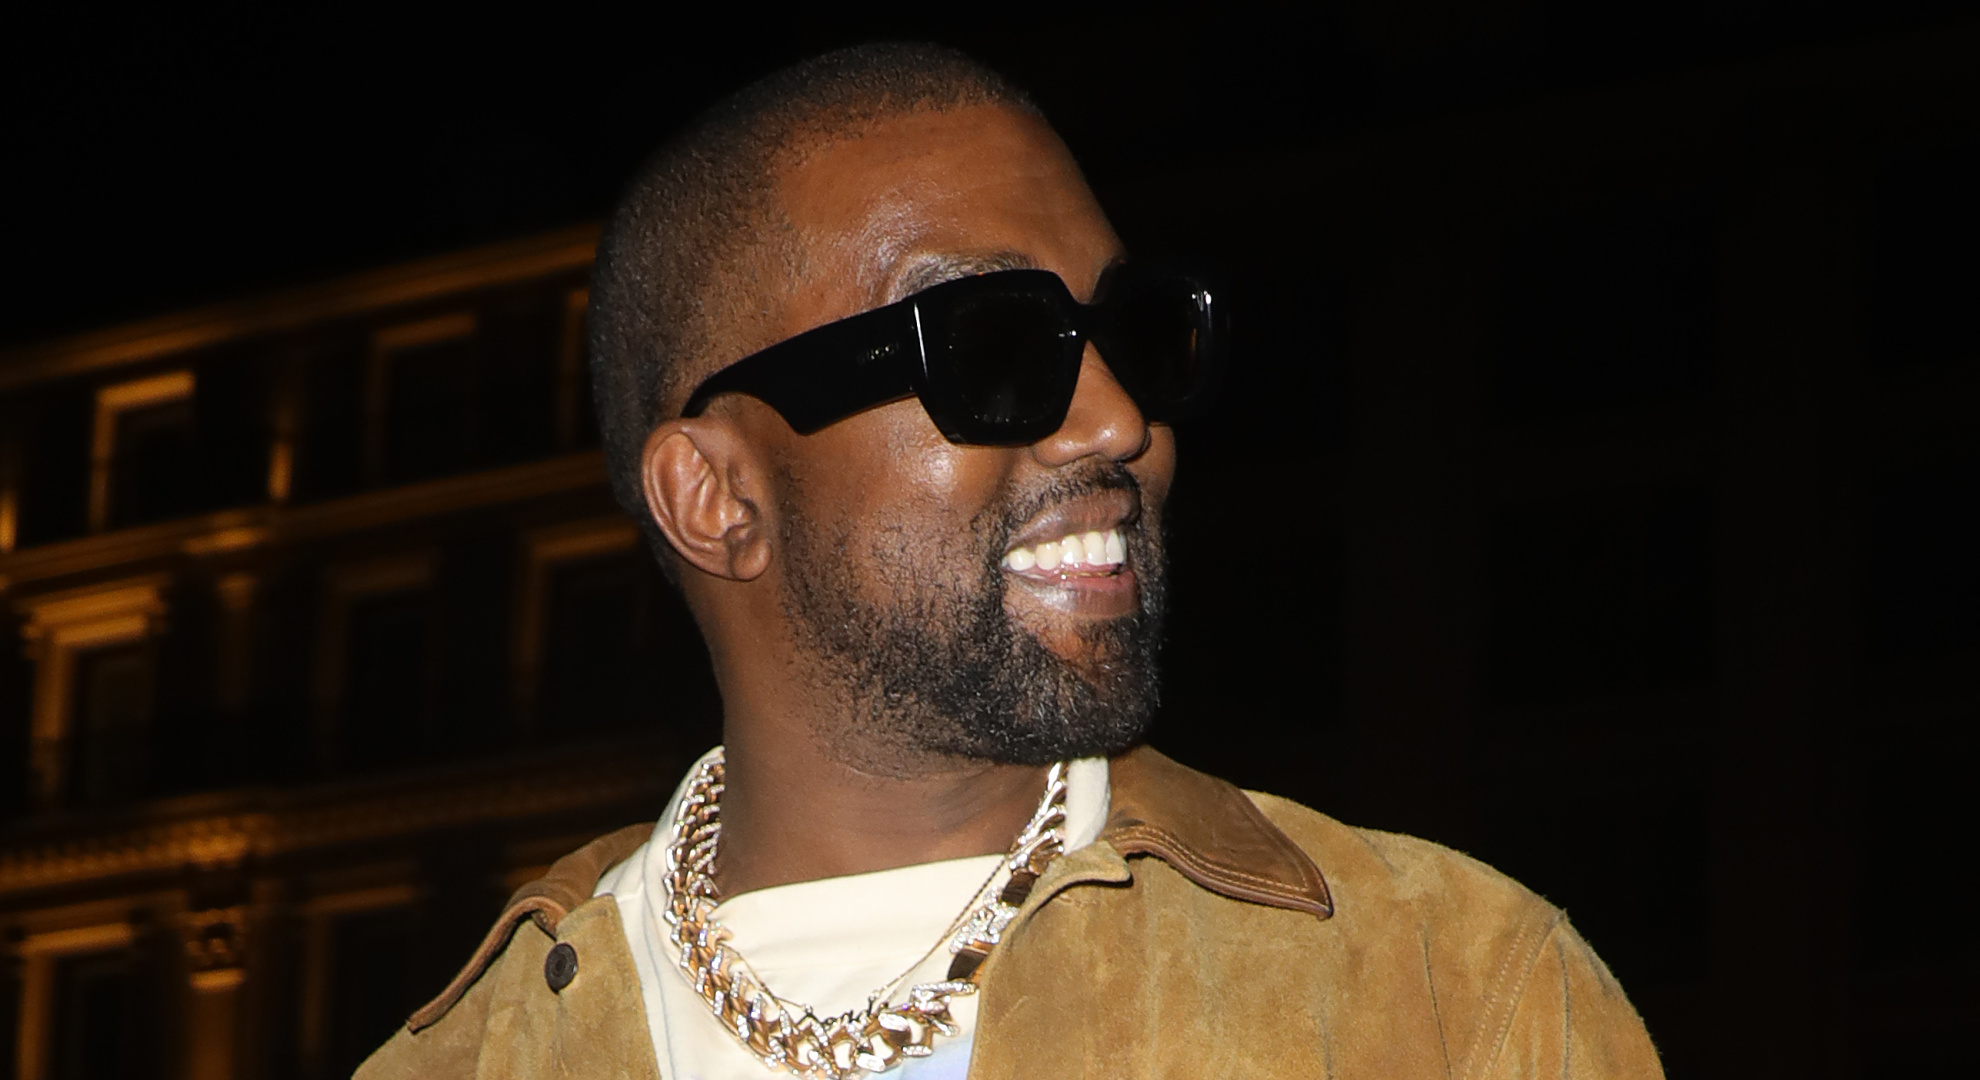 Kanye West Spotted With Full Face Covering at Balenciaga Show in Paris   Complex